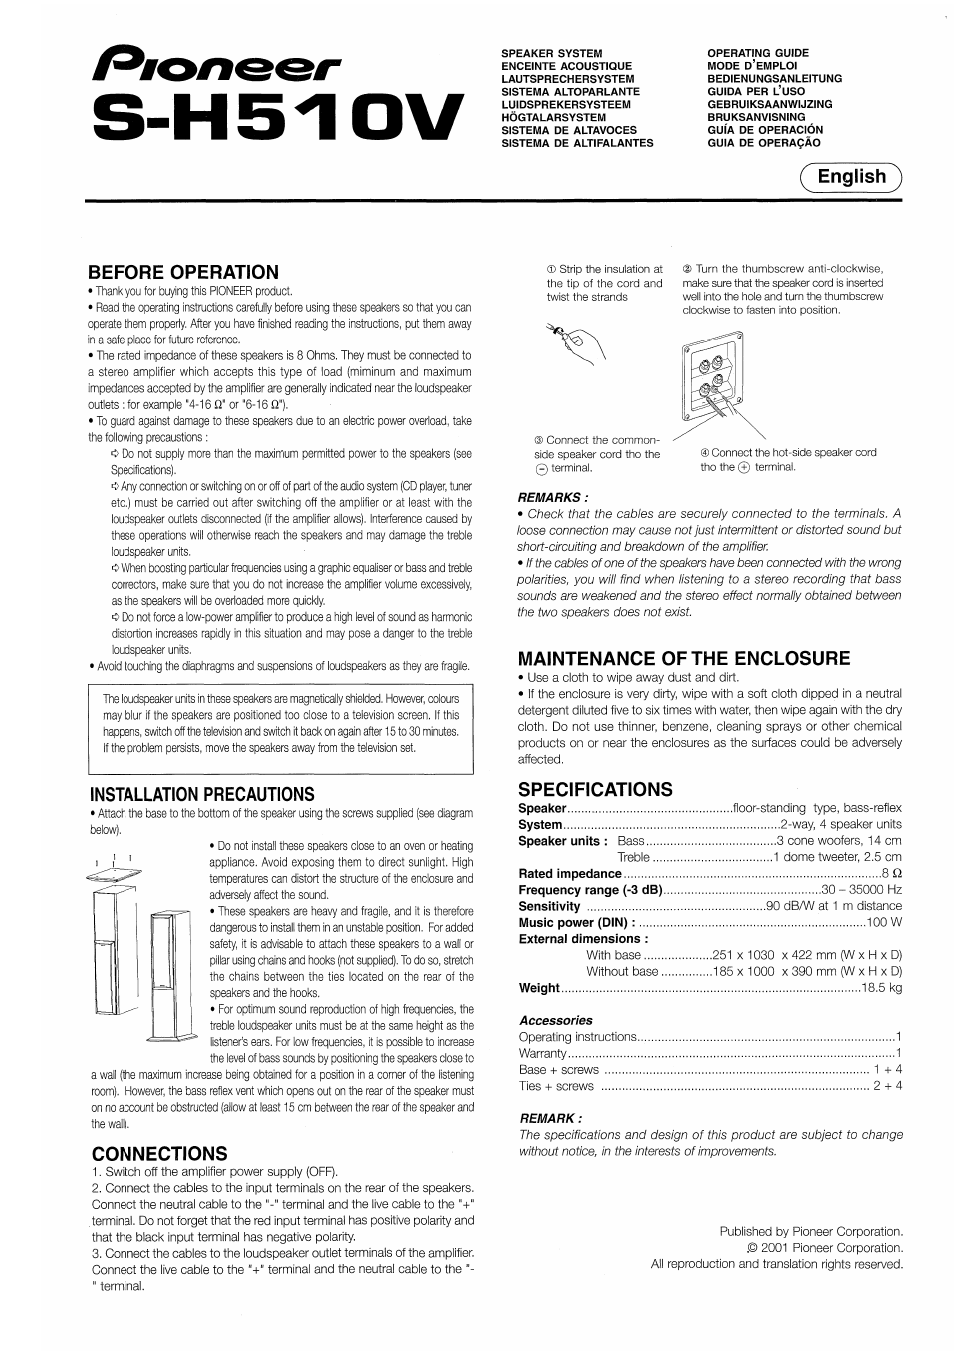 Pioneer S-H510V User Manual | 8 pages